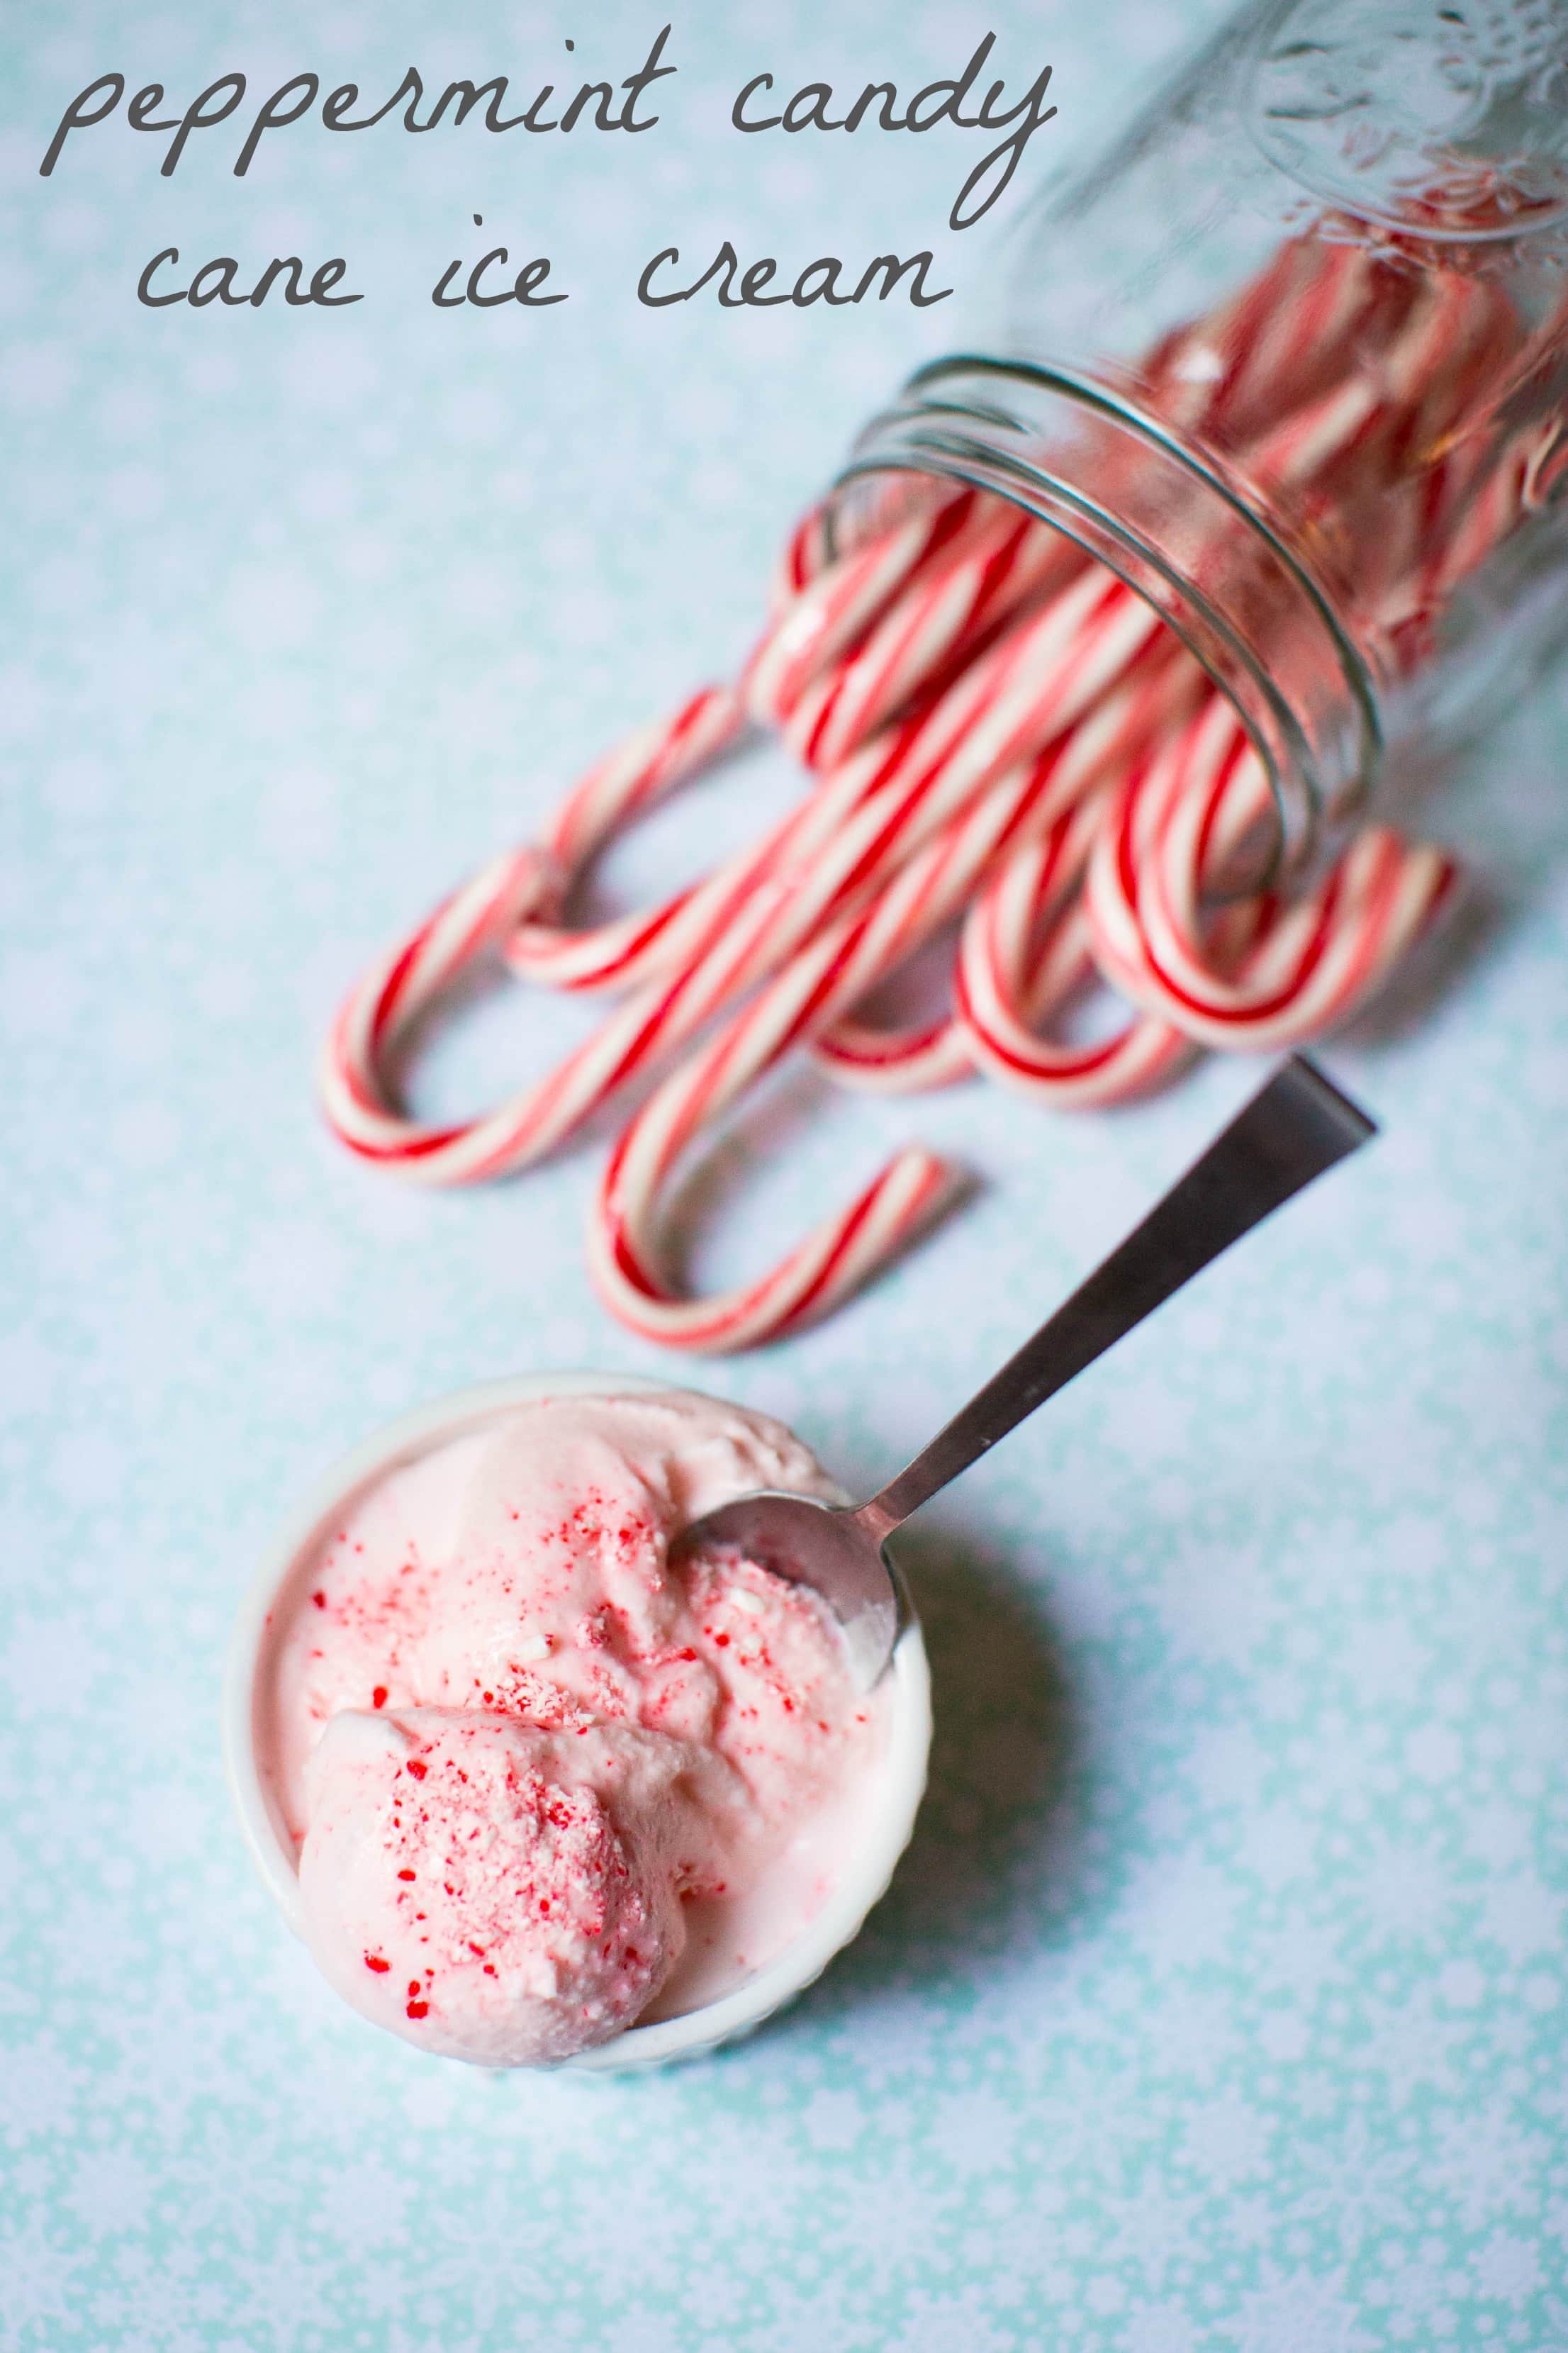 Guest Post: Peppermint Candy Cane Ice Cream - MomAdvice